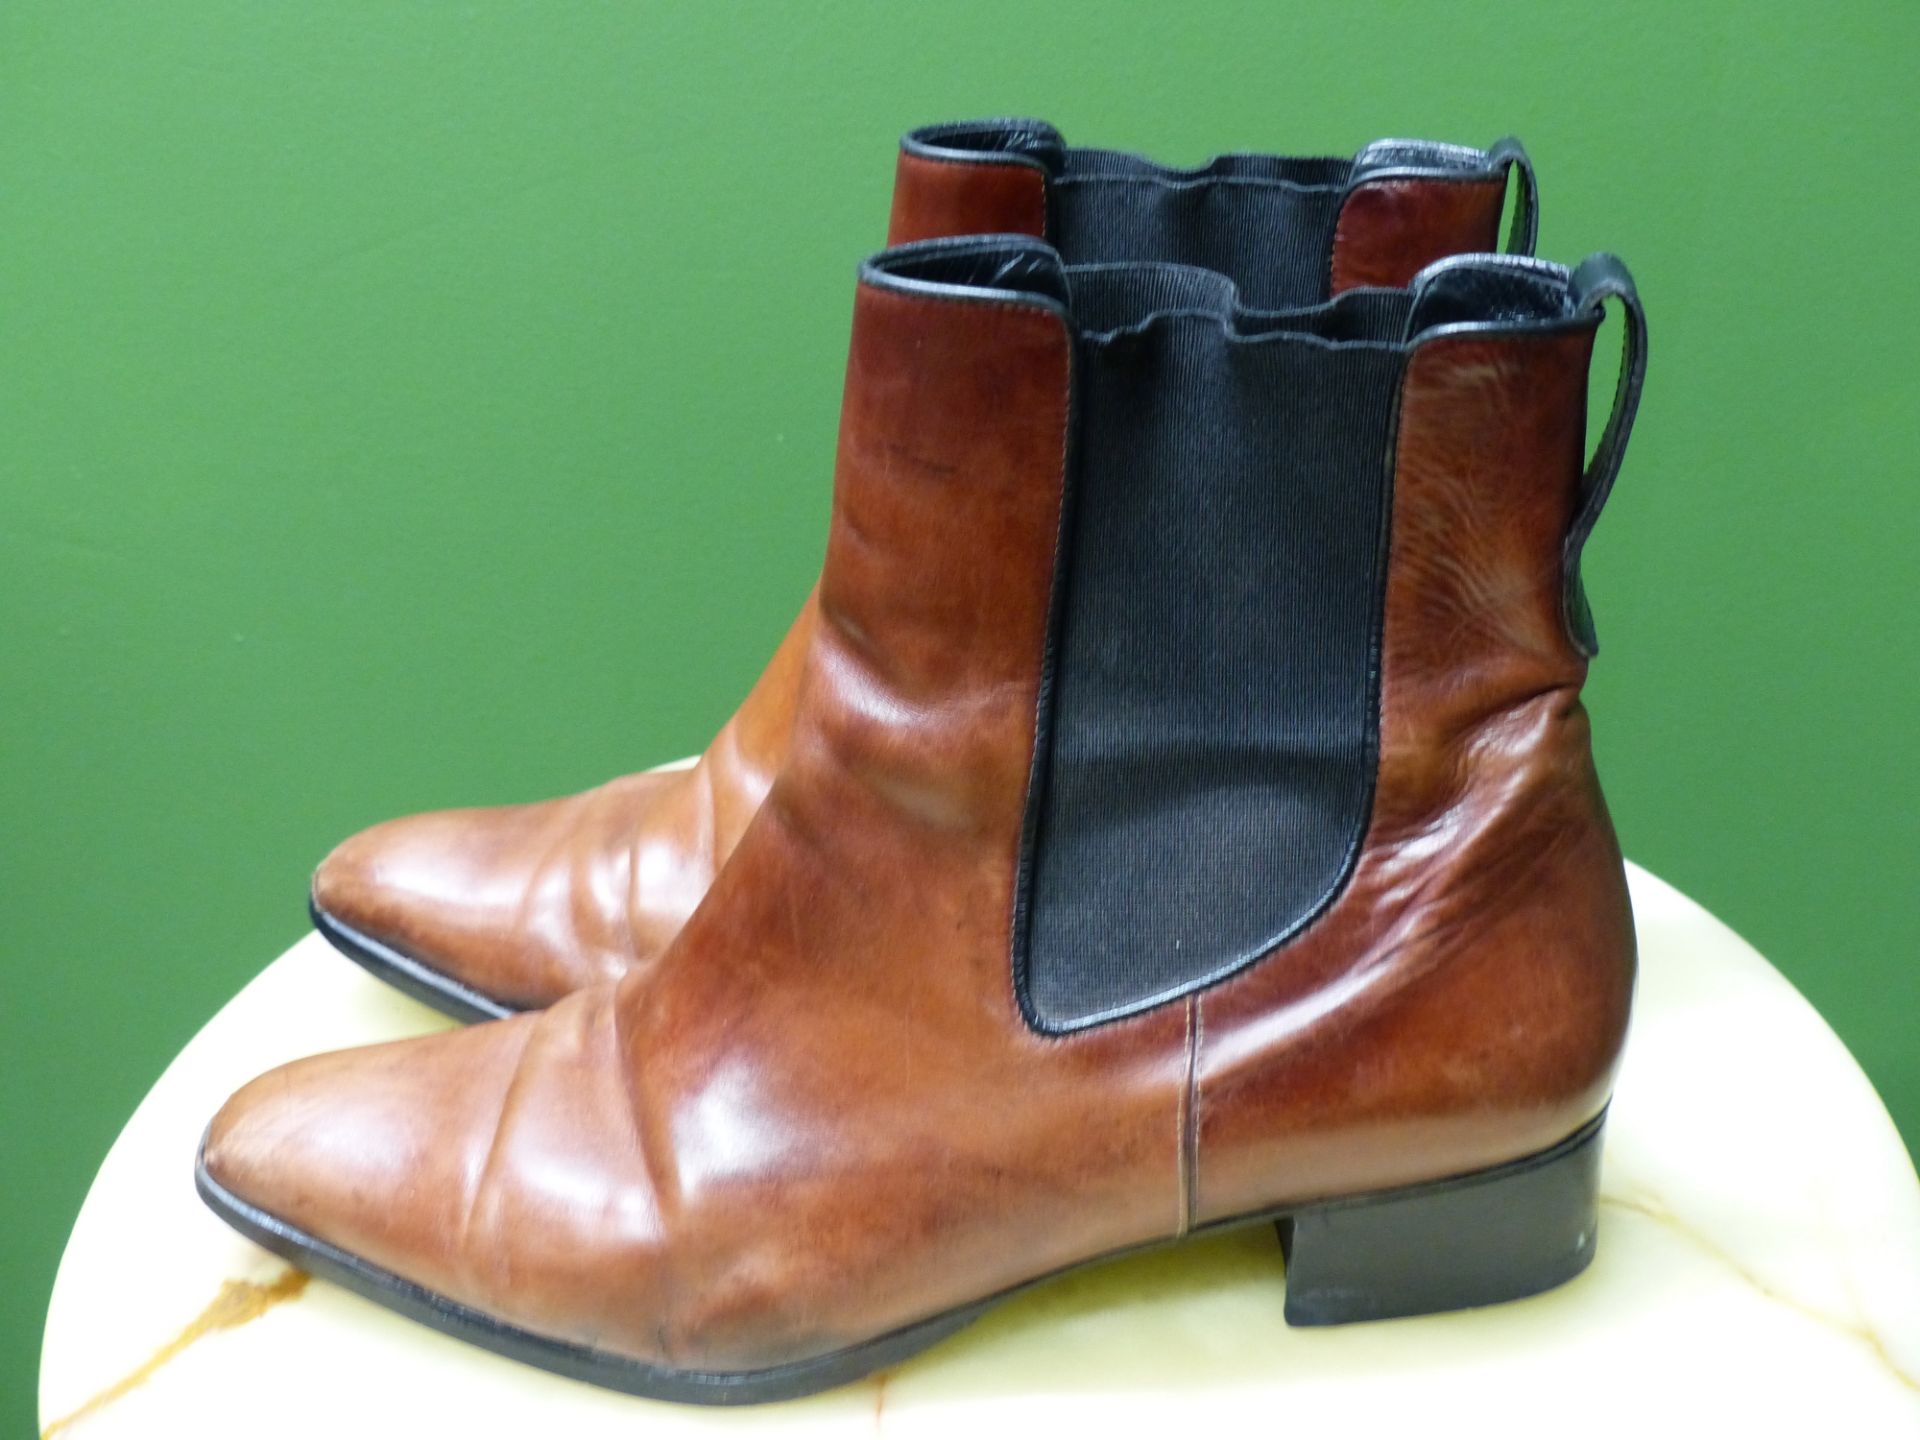 SHOES. LORENZO BANFI ITALY BLACK LEATHER COURT SHOES EUR SIZE 39.5. TOGETHER WITH BROWN BOOTS SIZE - Image 8 of 10